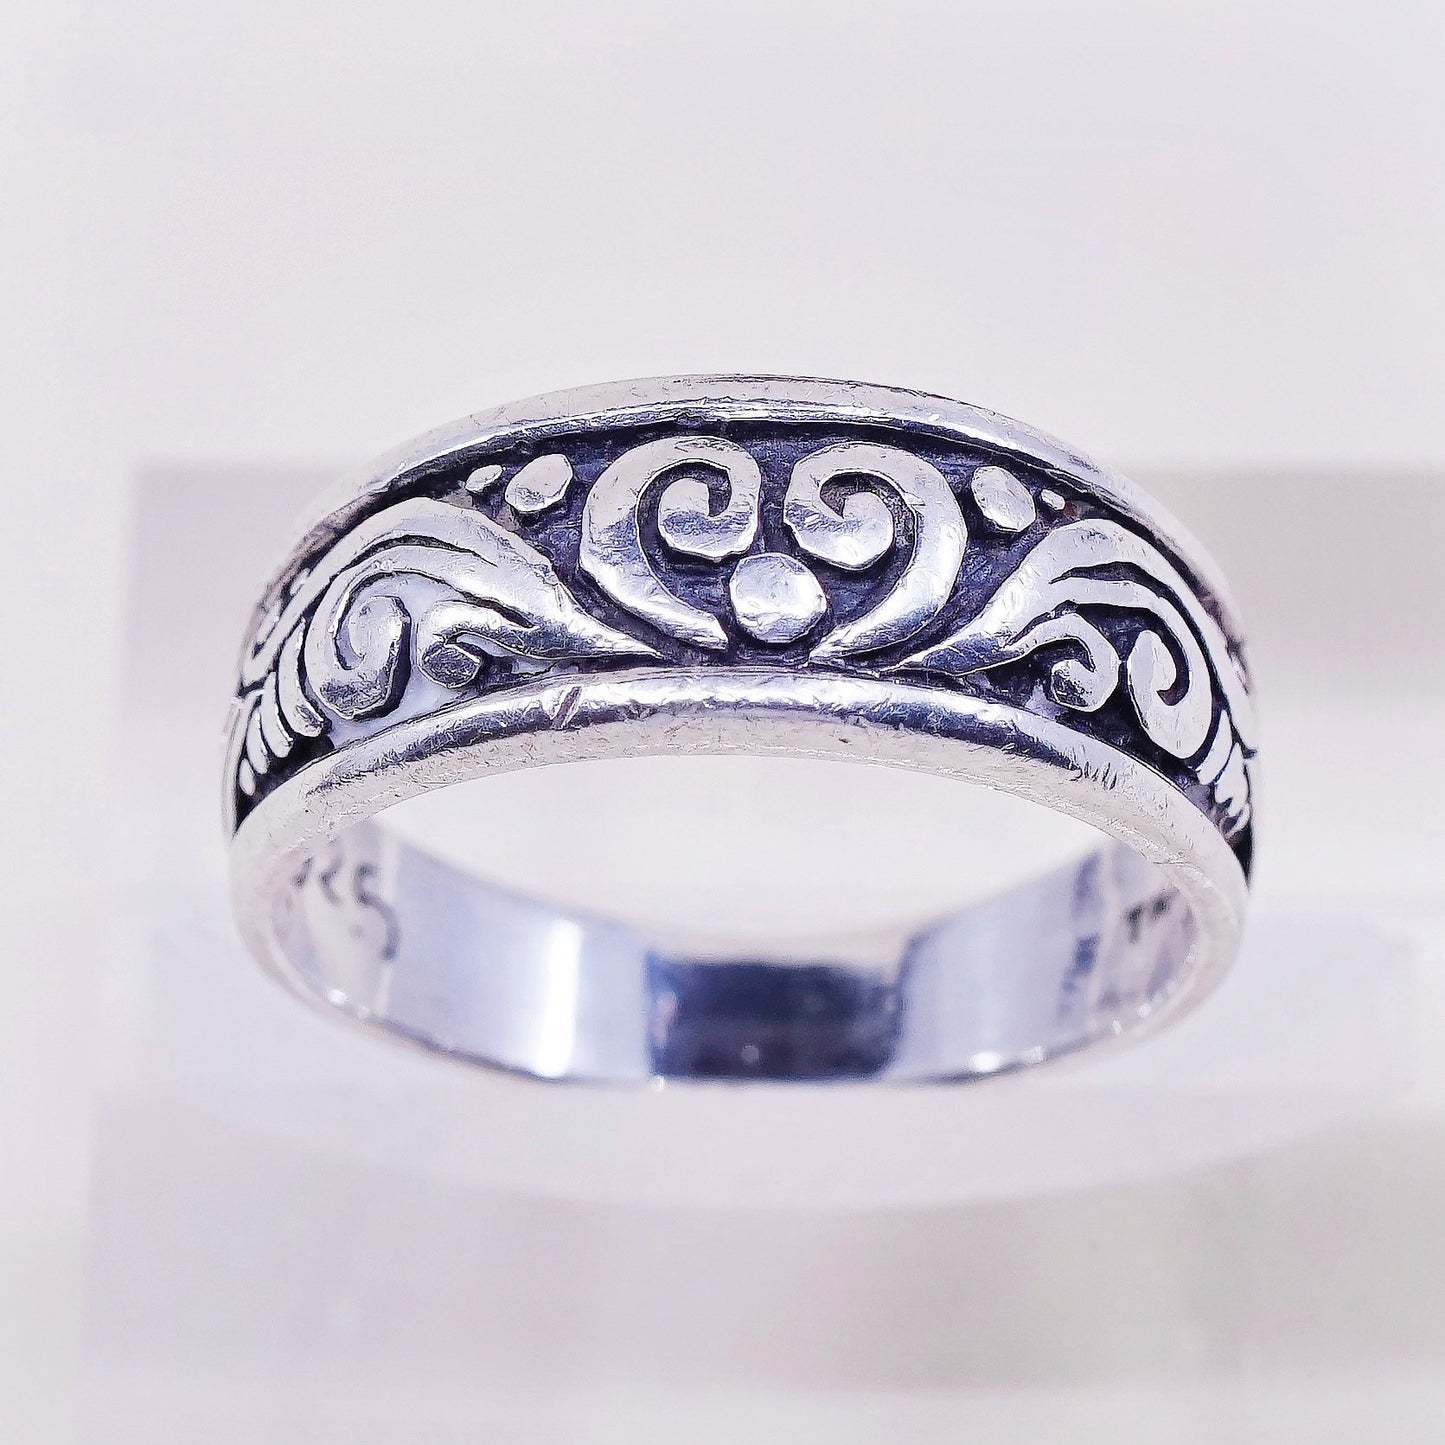 Size 9.25, vintage TMA Sterling silver handmade ring, swirl 925 band